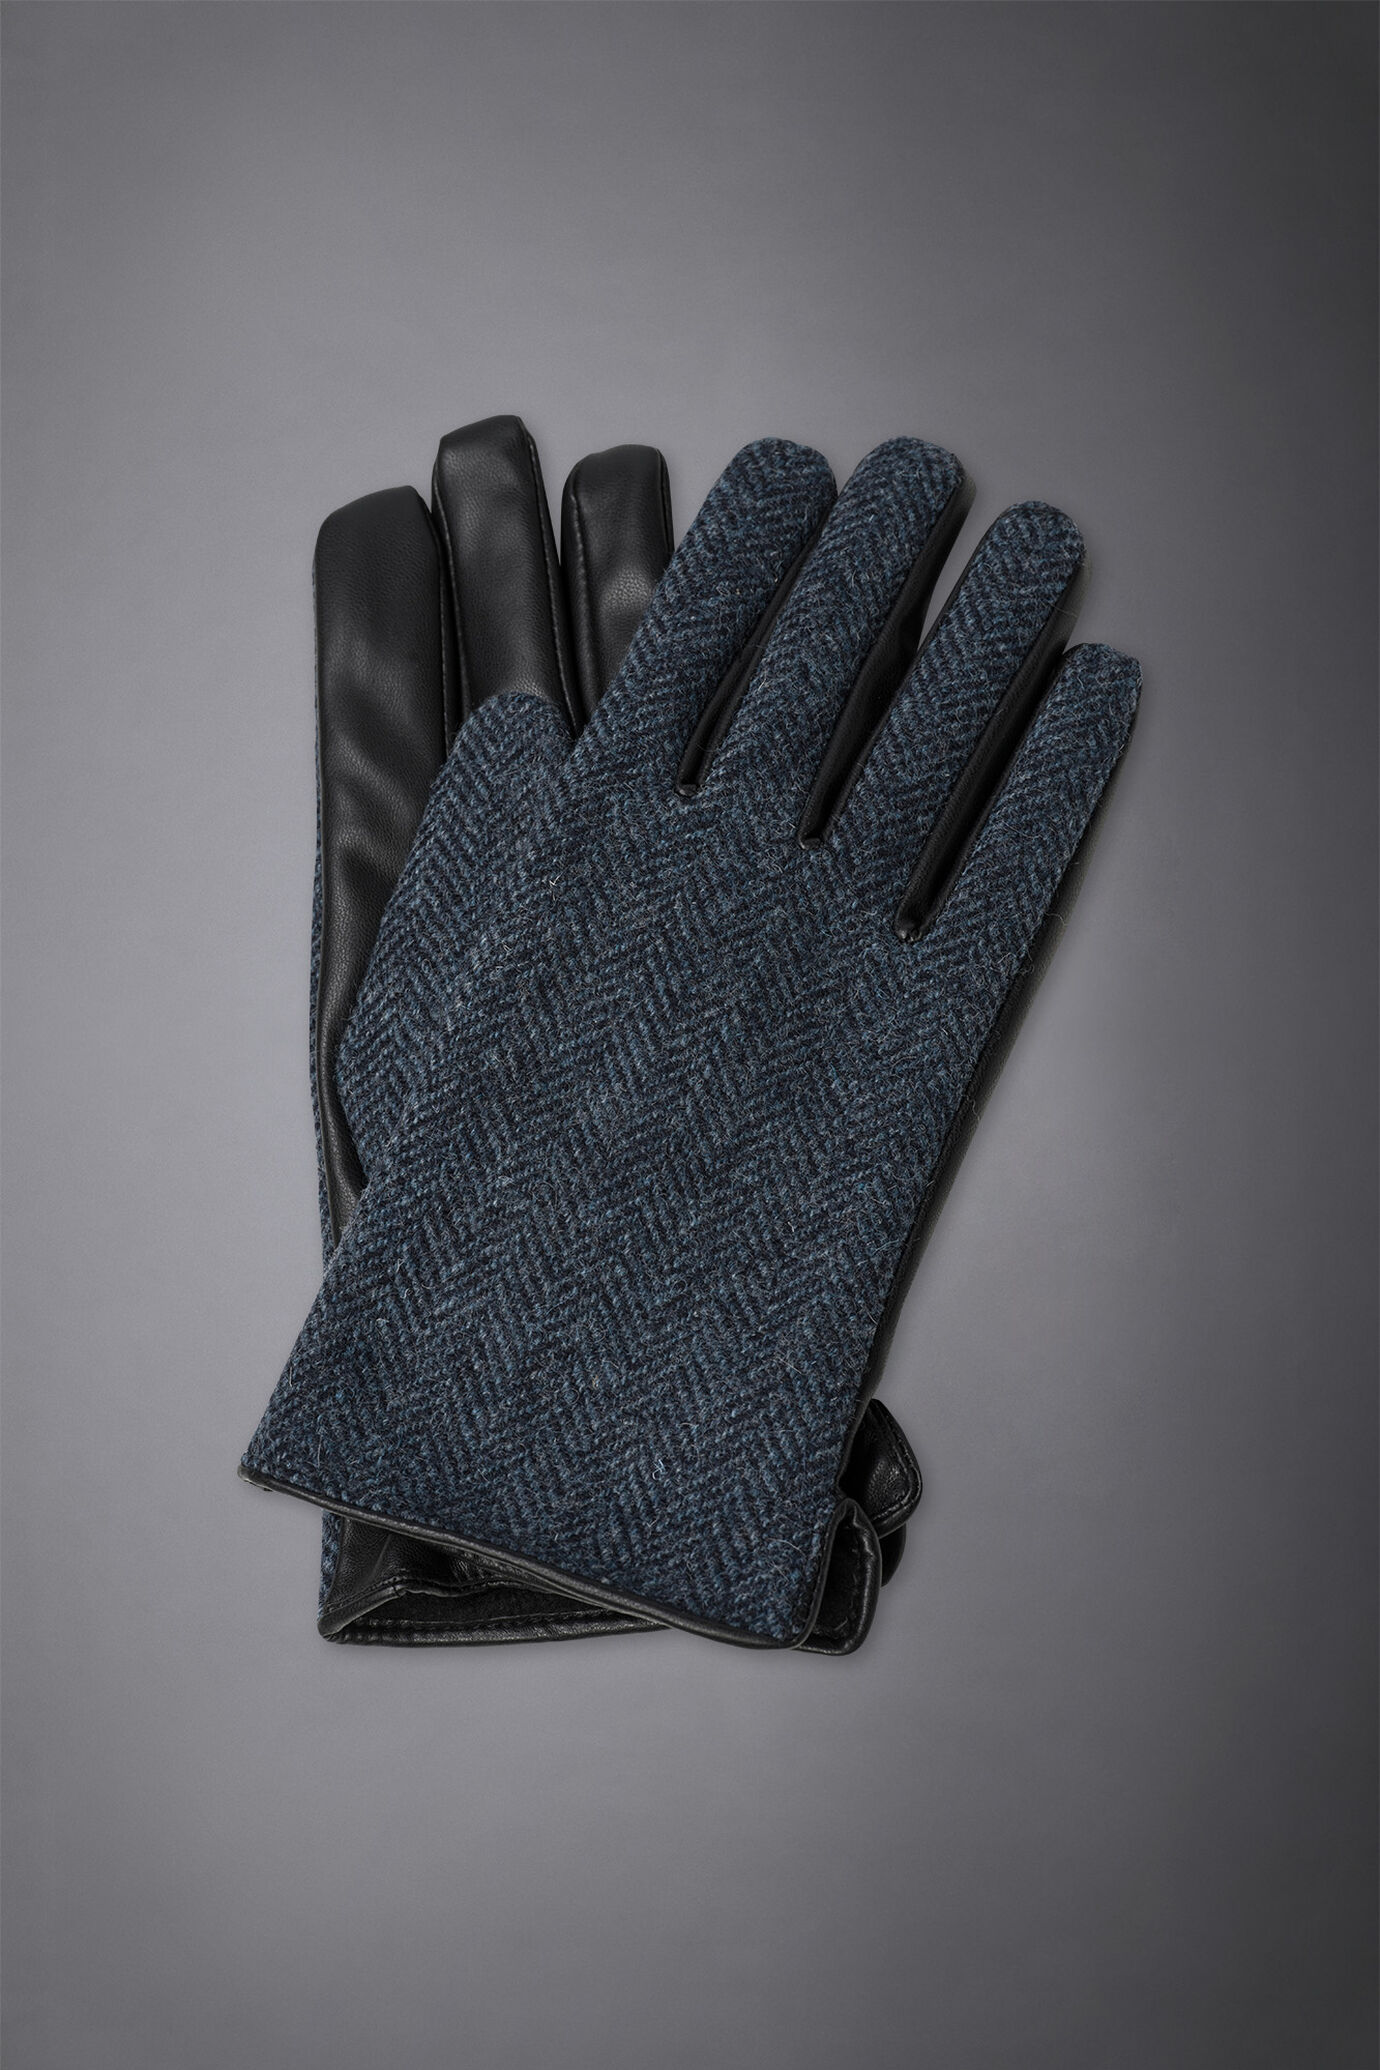 100% English tweed patterned wool and faux leather gloves